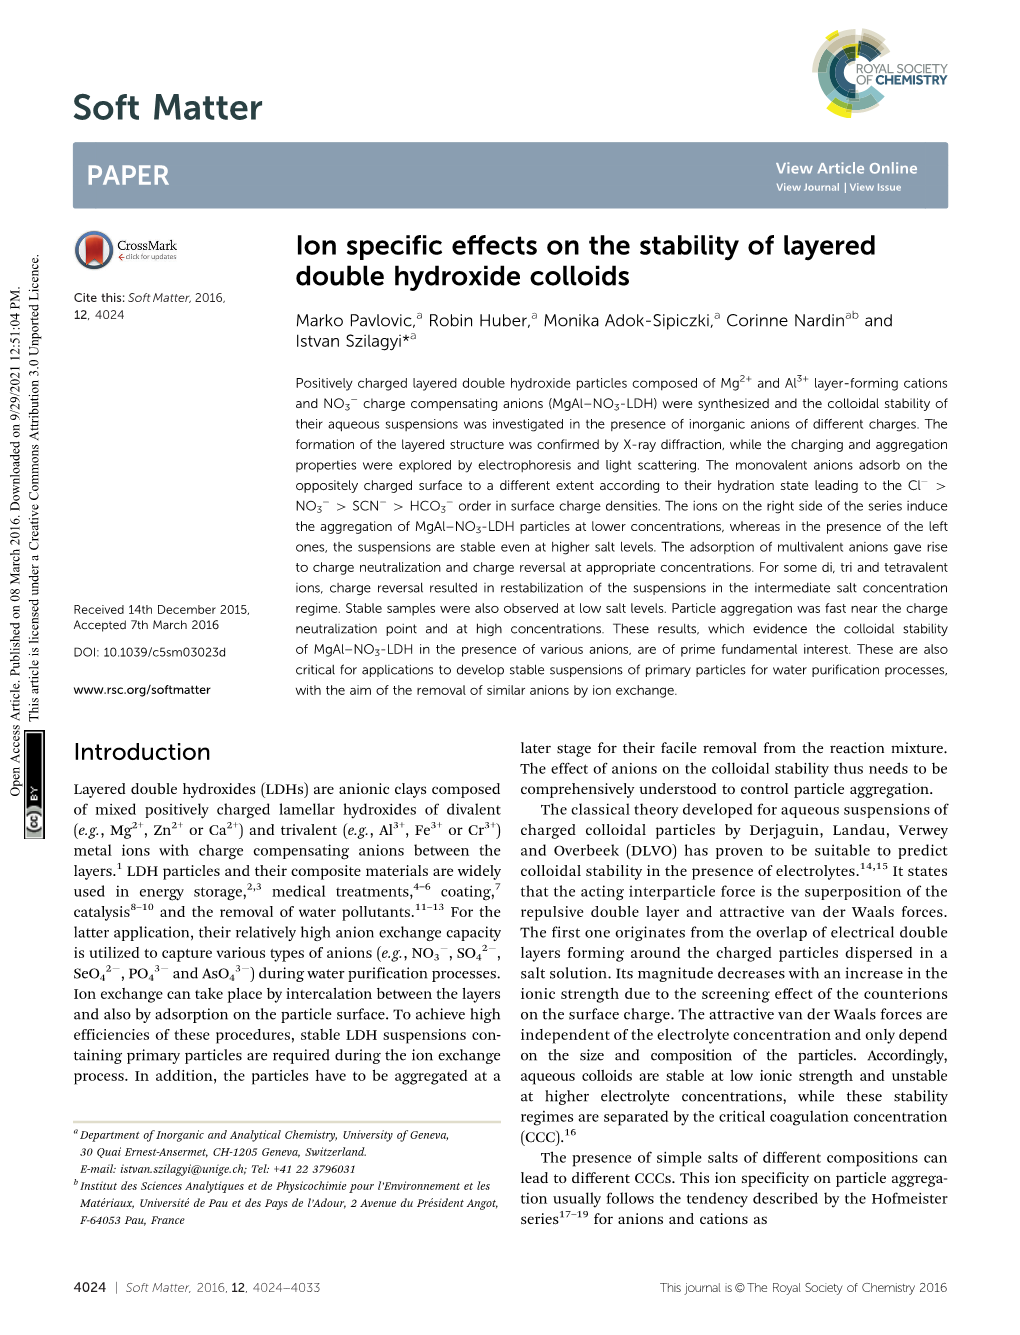 Ion Specific Effects on the Stability of Layered Double Hydroxide Colloids